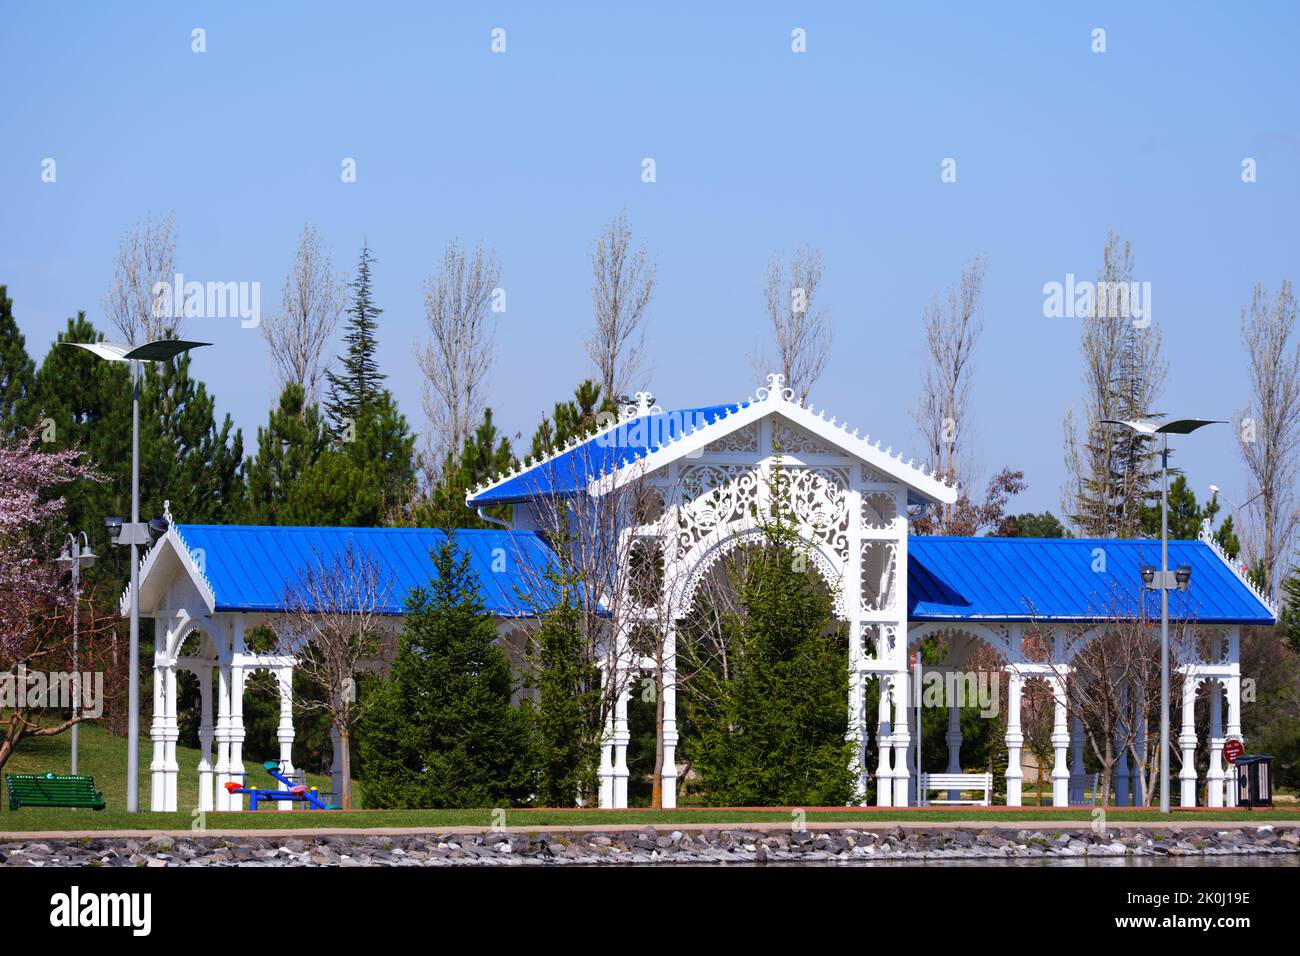 Nostalgic wooden train station with blue roof within trees lakeside in summer Stock Photo